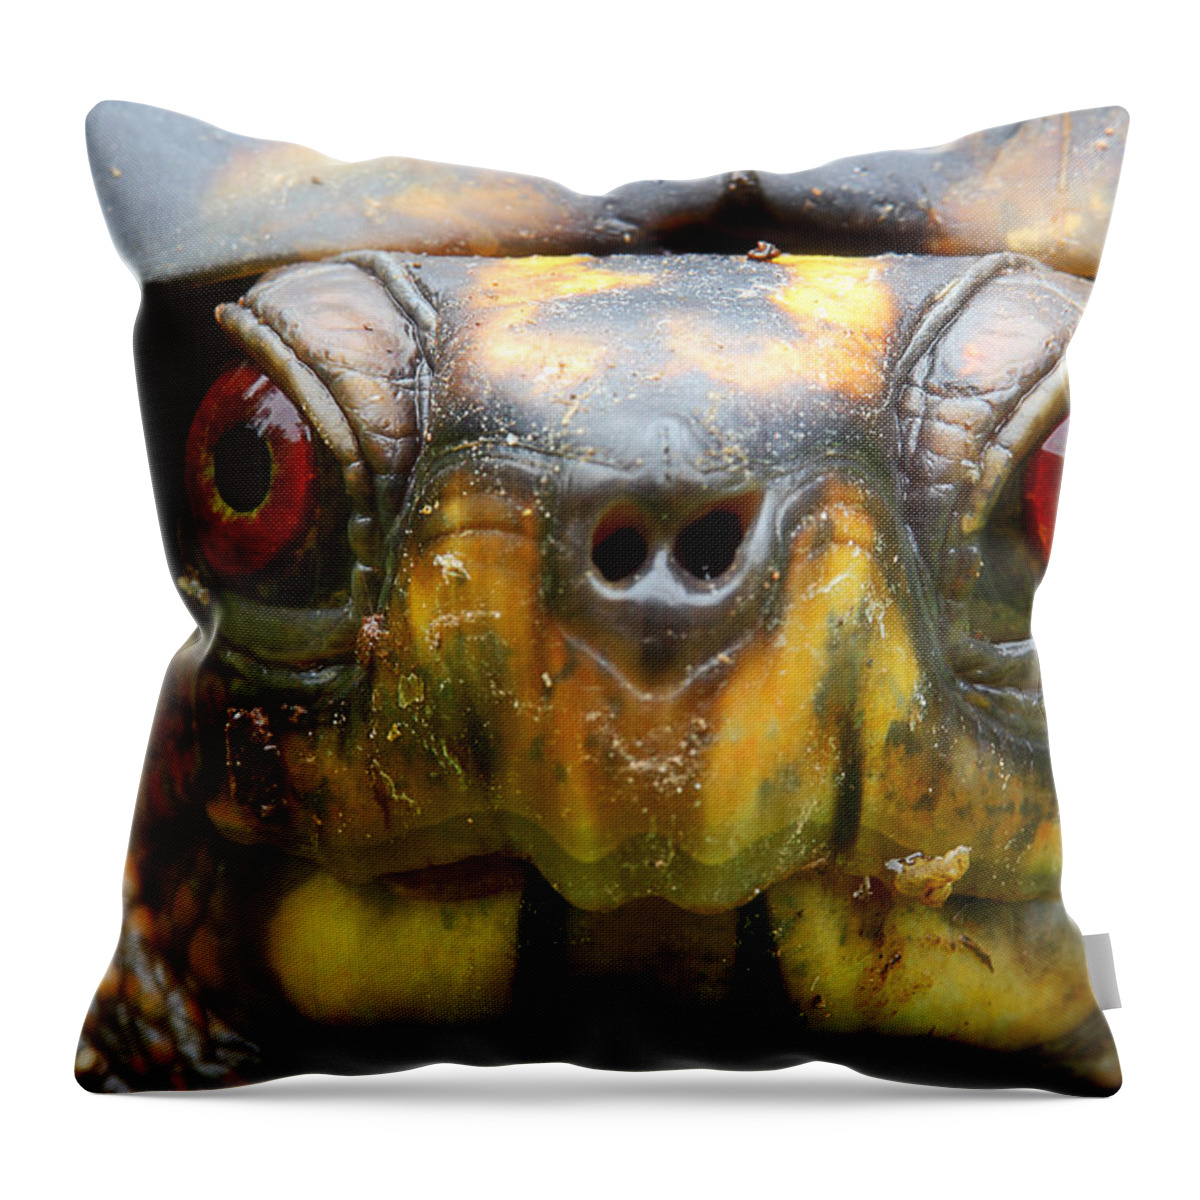 Eastern Box Turtle Throw Pillow featuring the photograph Eastern Box Turtle 2 by Michael Eingle